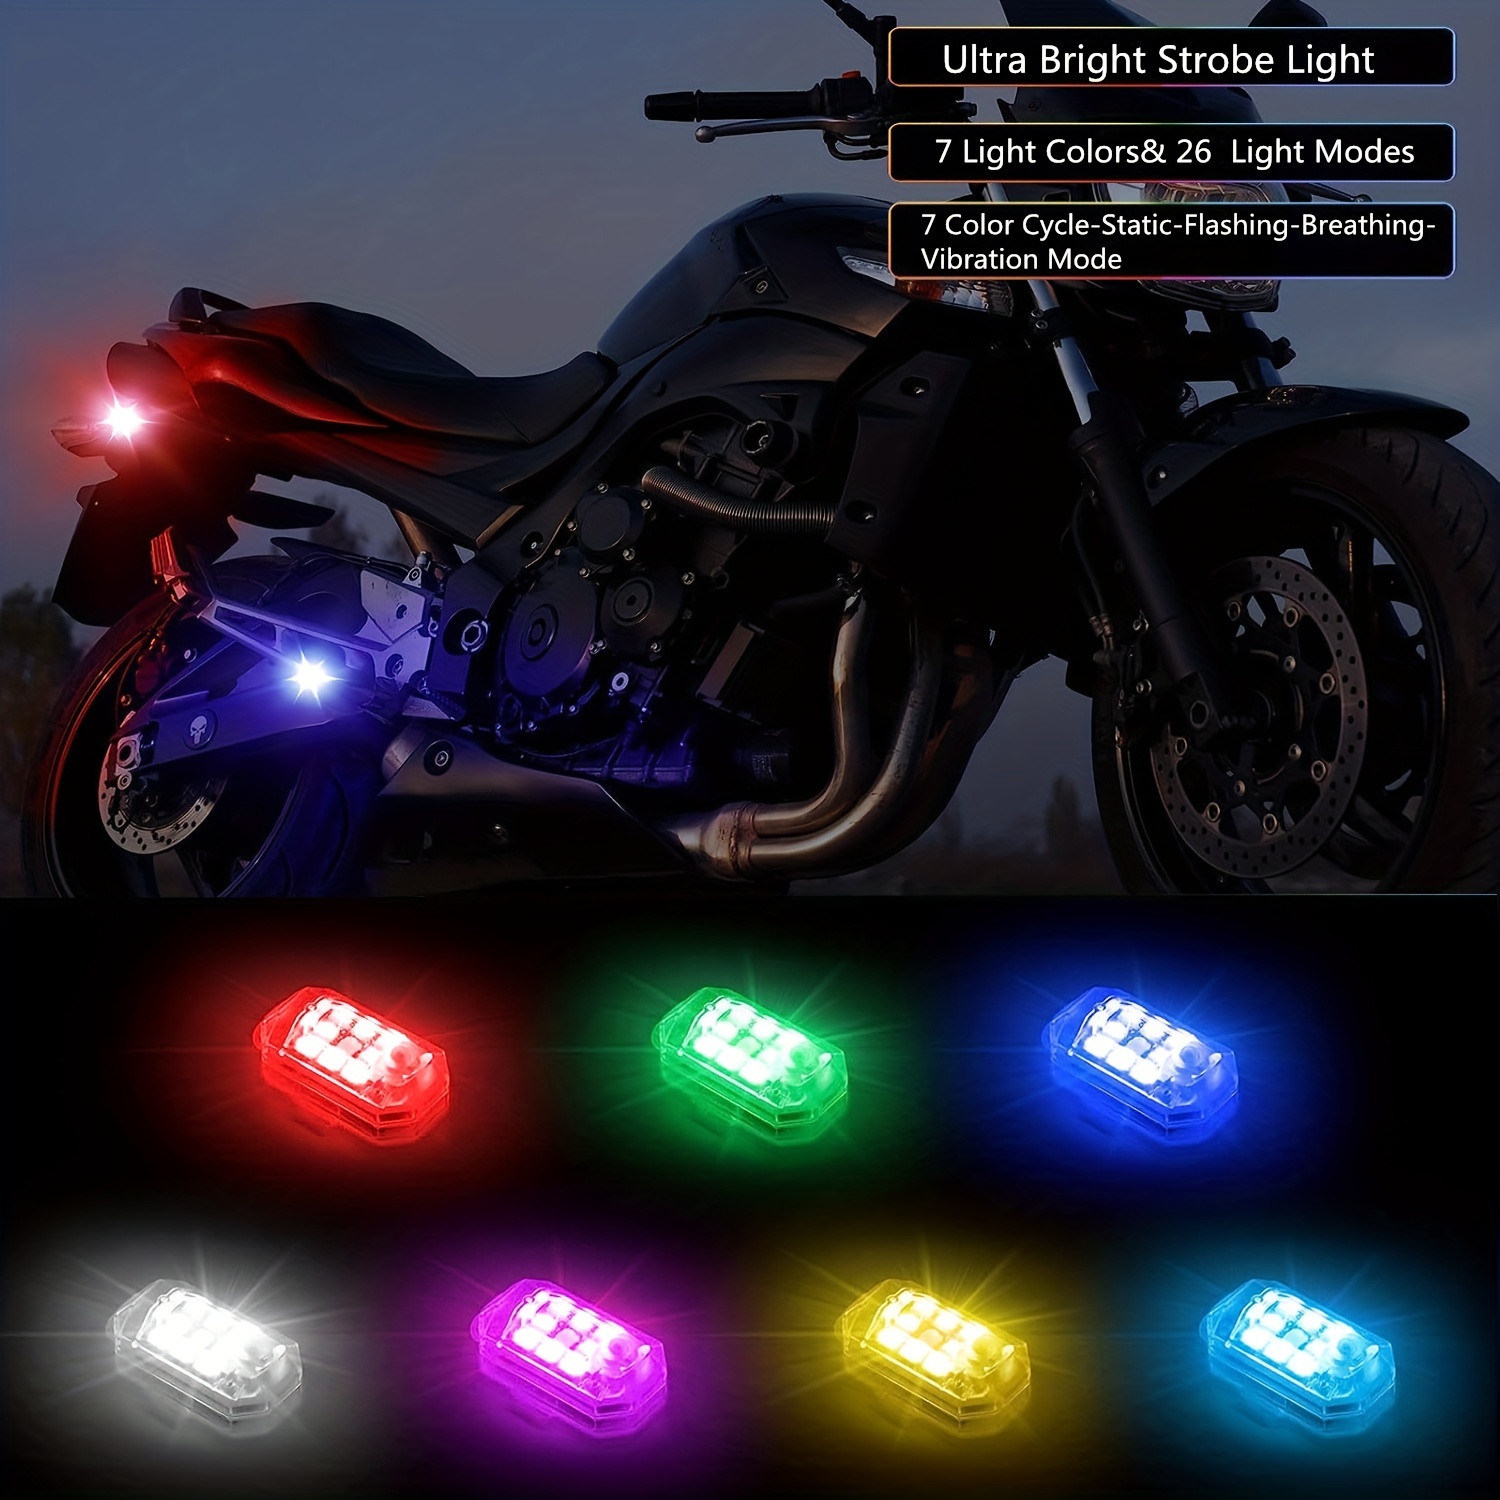  Wireless LED Strobe Light with Remote, High Brightness 7 Colors  USB Rechargeable Flashing Lights for Car, Trucks, Motorcycle, Bike,  Vehicles, Drone, Riding Anti-Collision Night Signal Light (2Pcs) :  Automotive